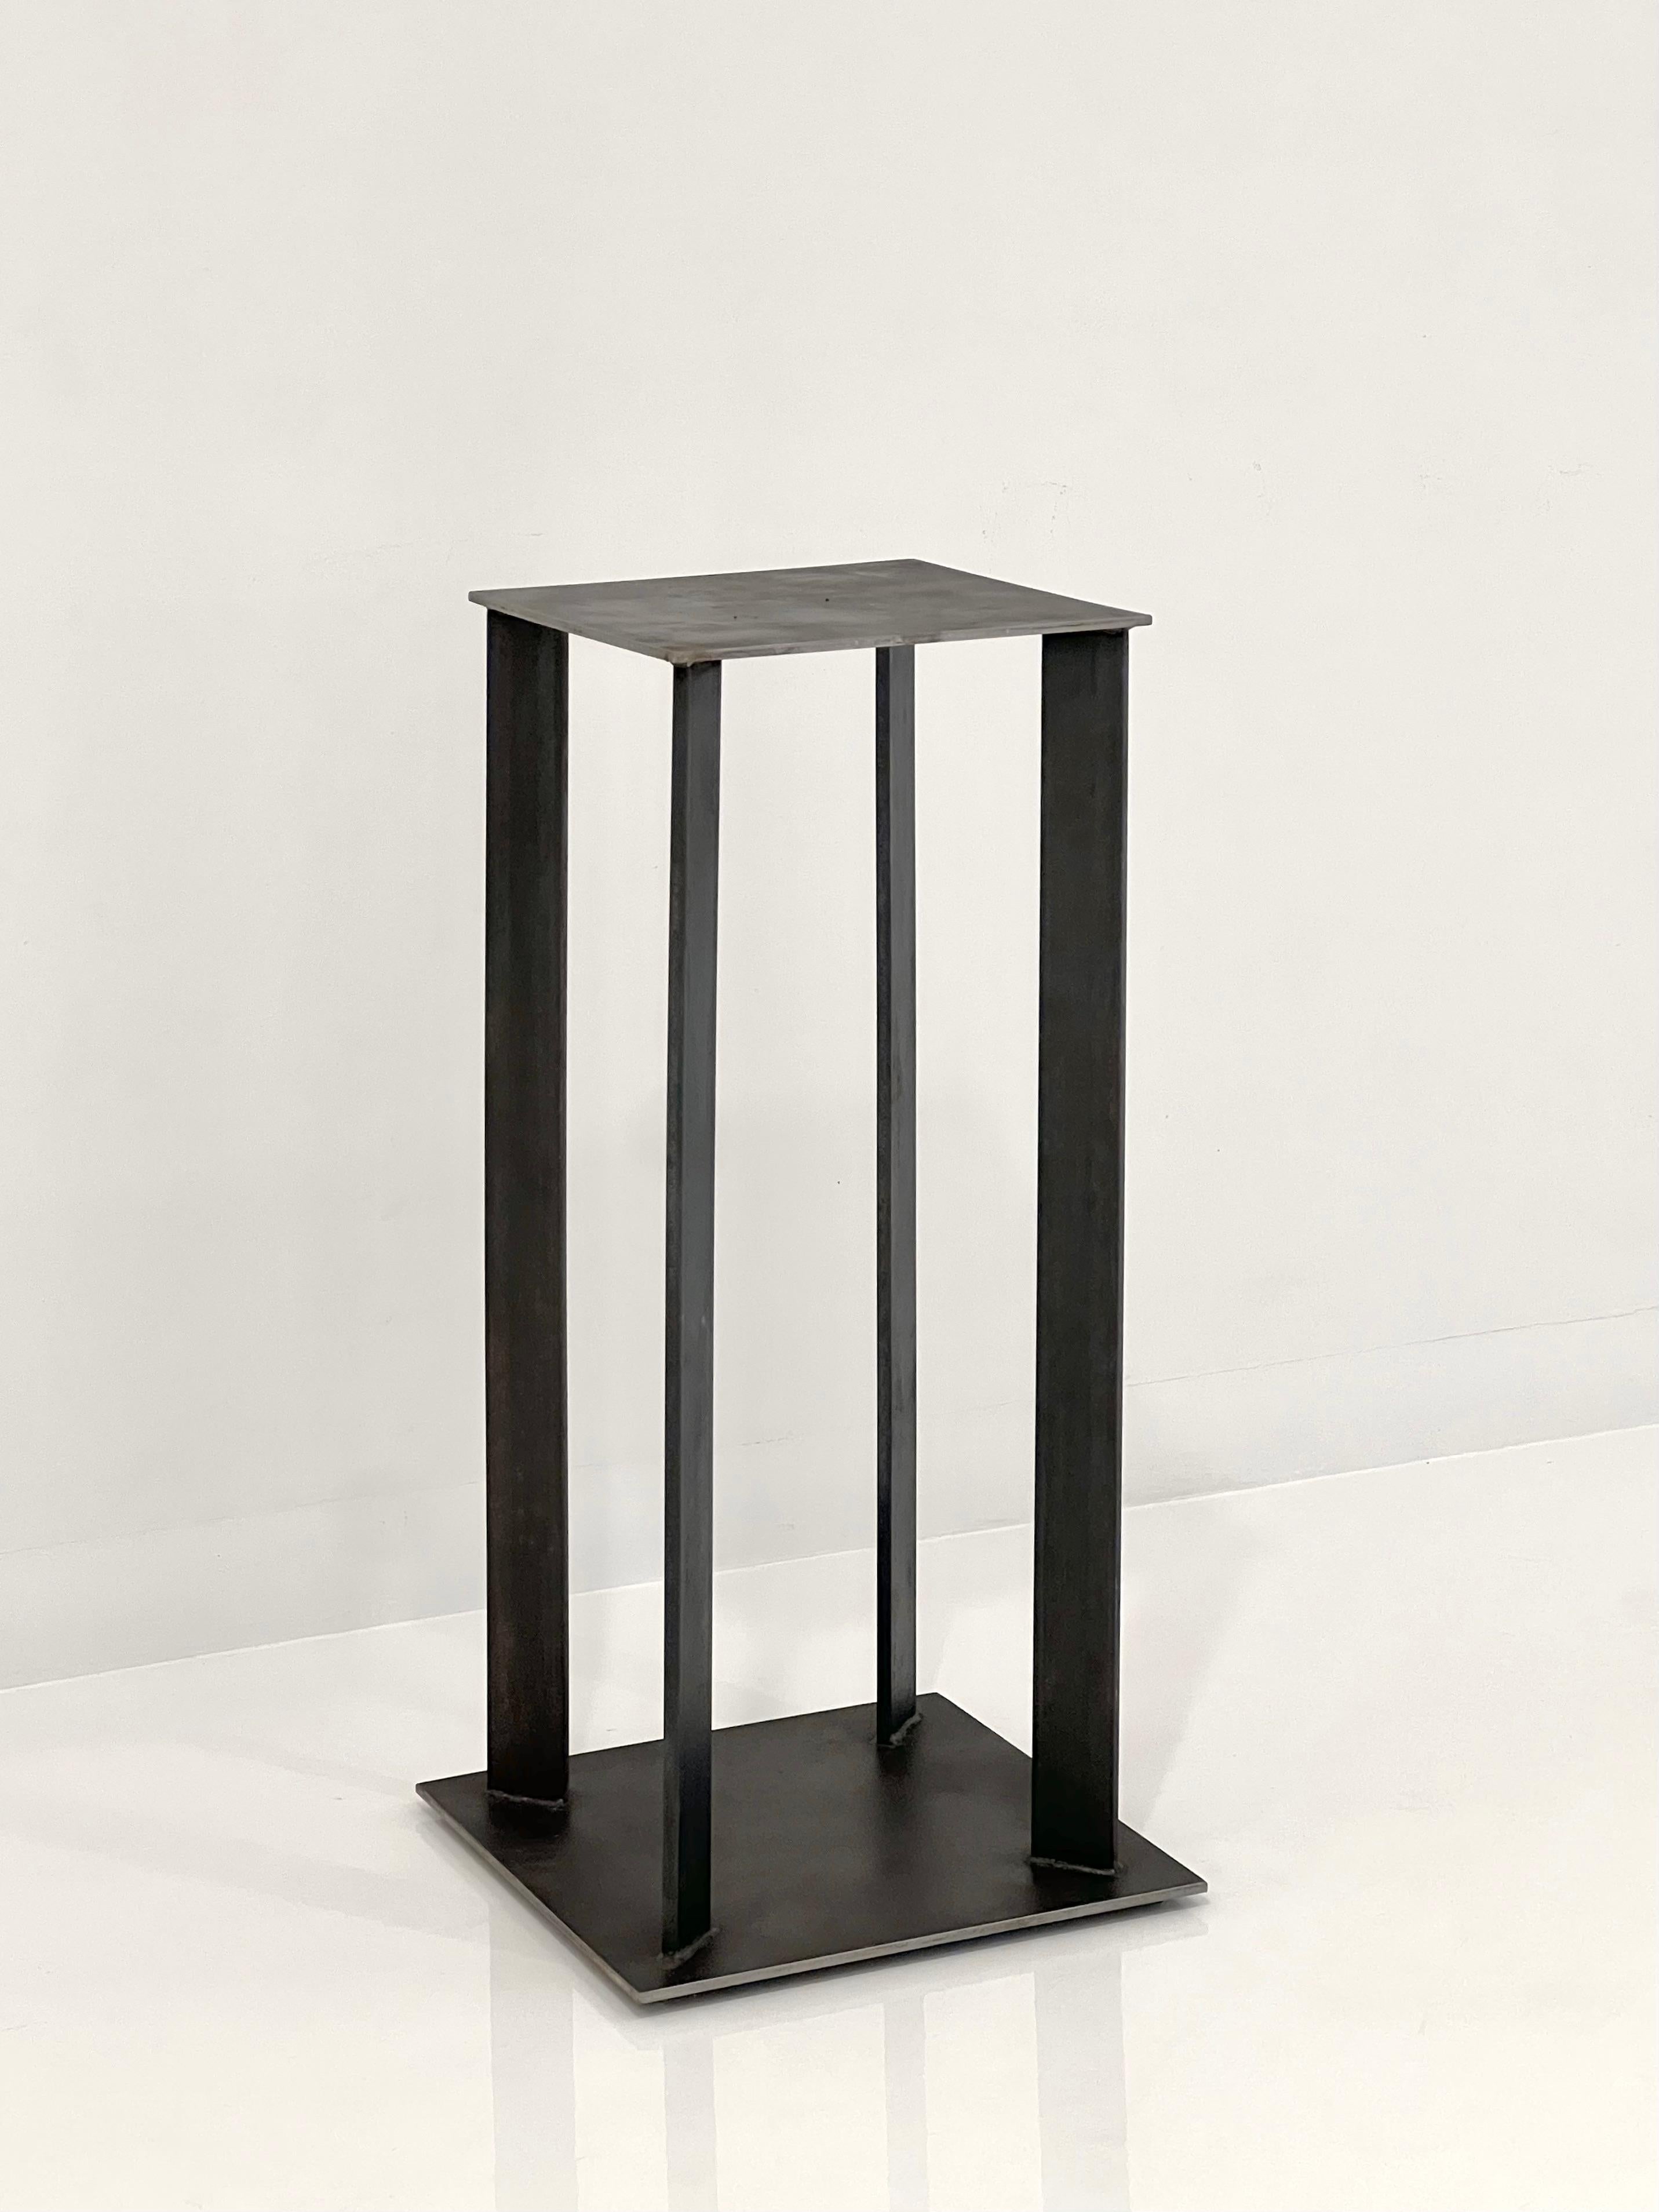 A simple design perfect for displaying art objects by local New York area contemporary sculptor Robert Koch.